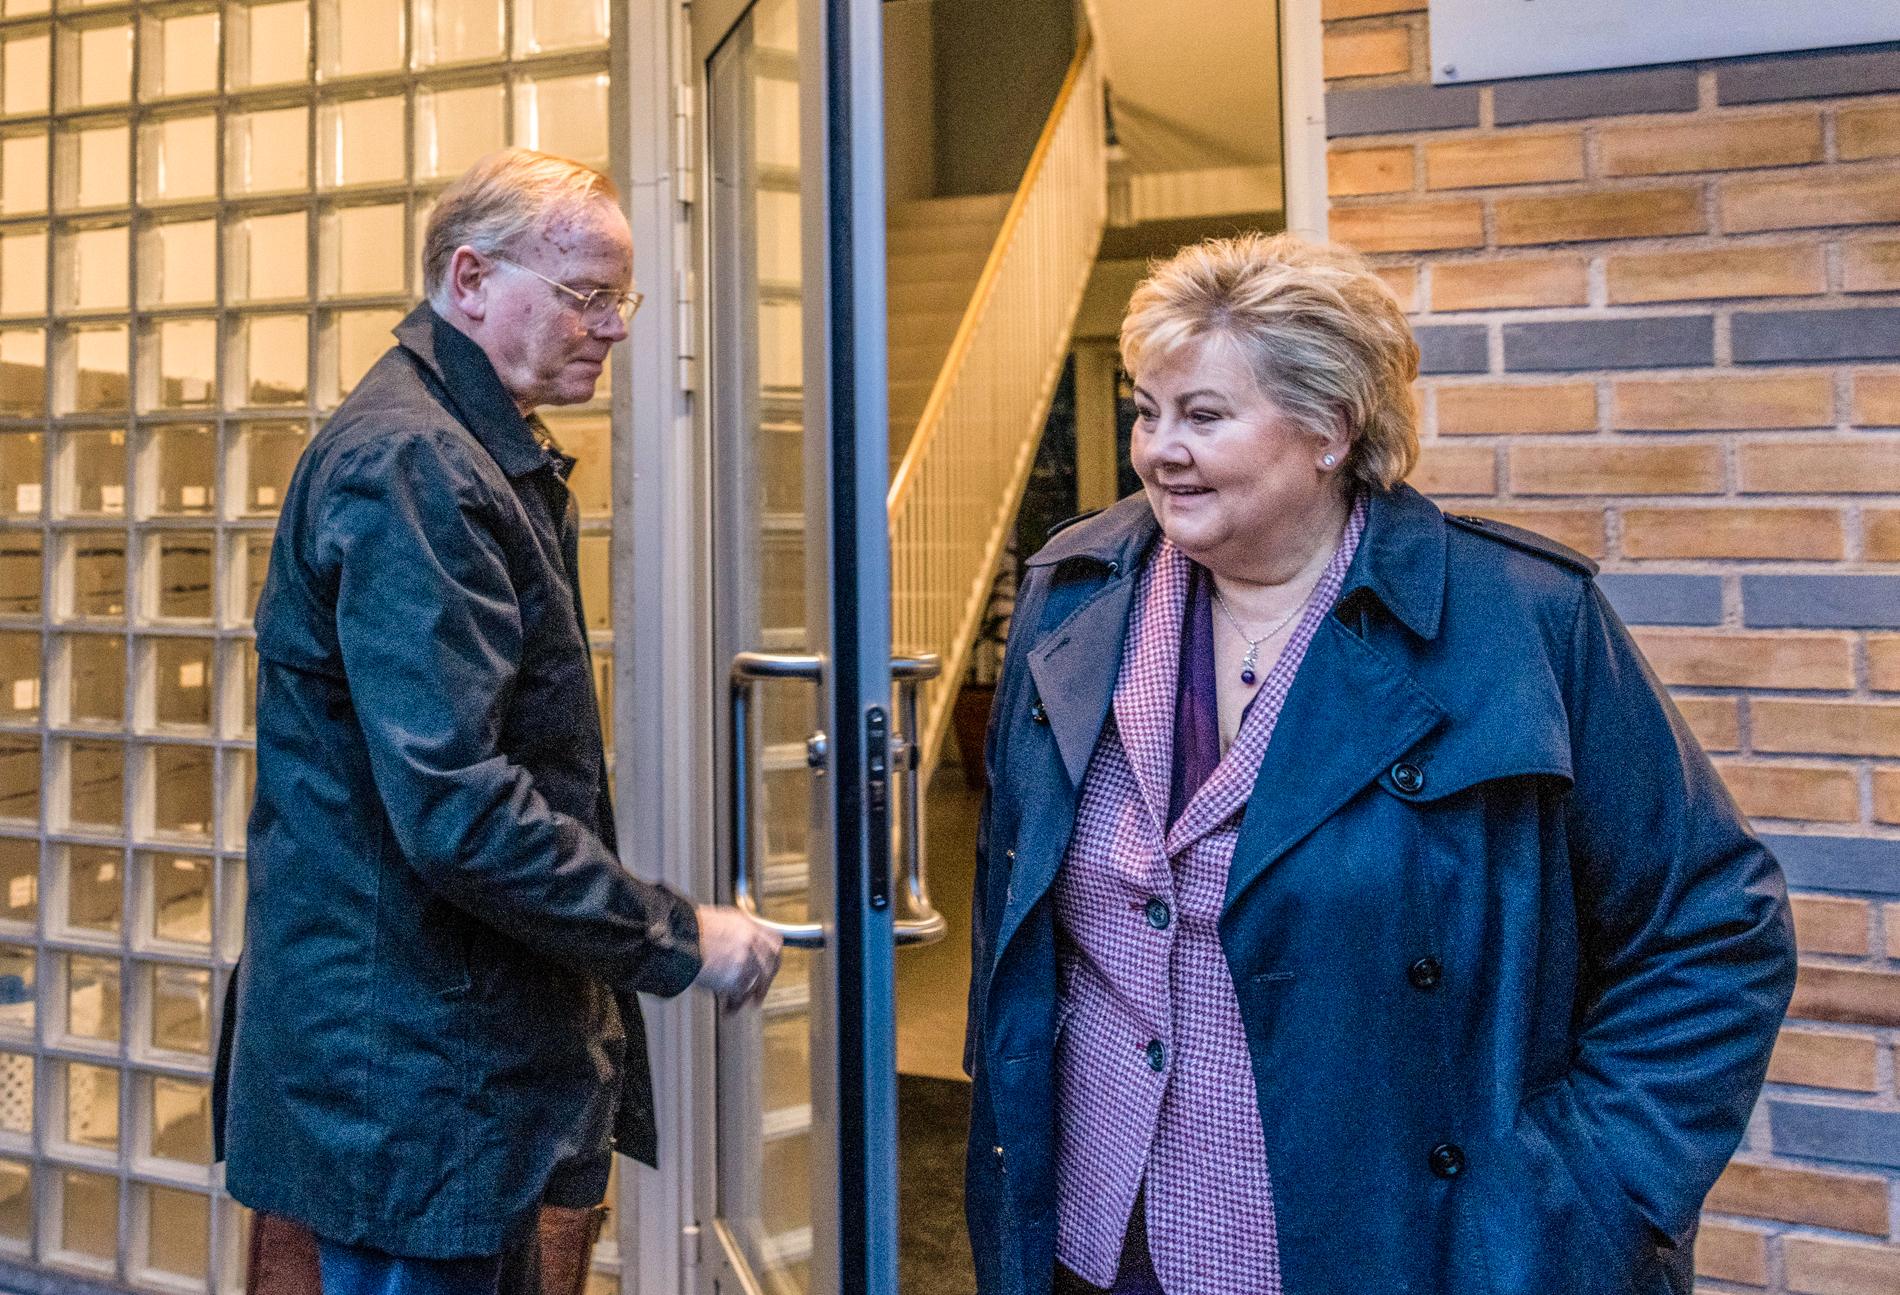 Reputation expert Kjell Terje Ringdahl says it would be interesting for couple Erna Solberg and Cinder Venis to meet in public.